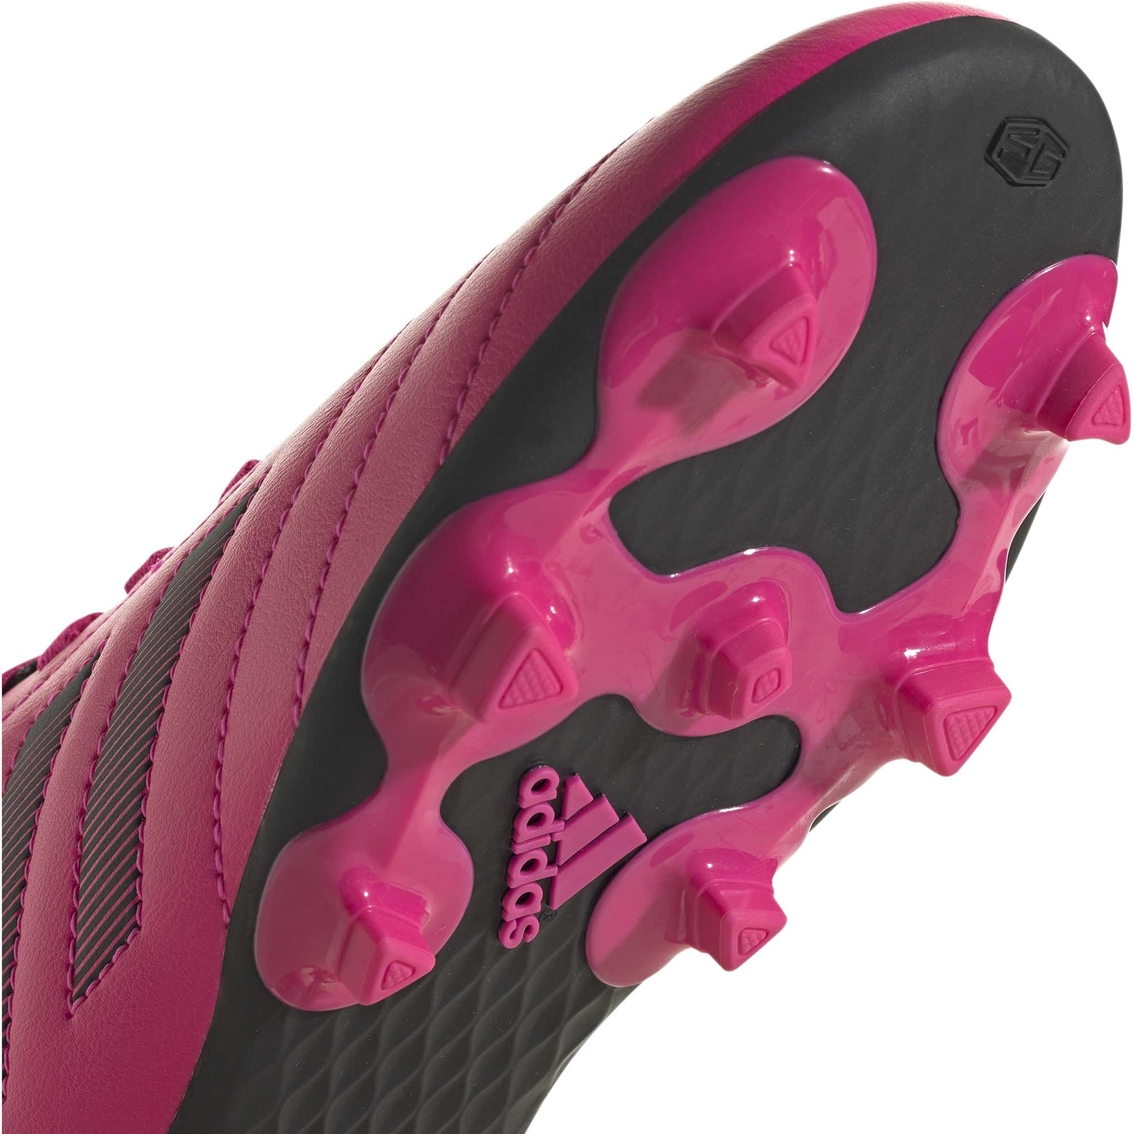 Adidas Grade School Girls Goletto VII Firm Ground Jr. Soccer Cleats - Image 7 of 8